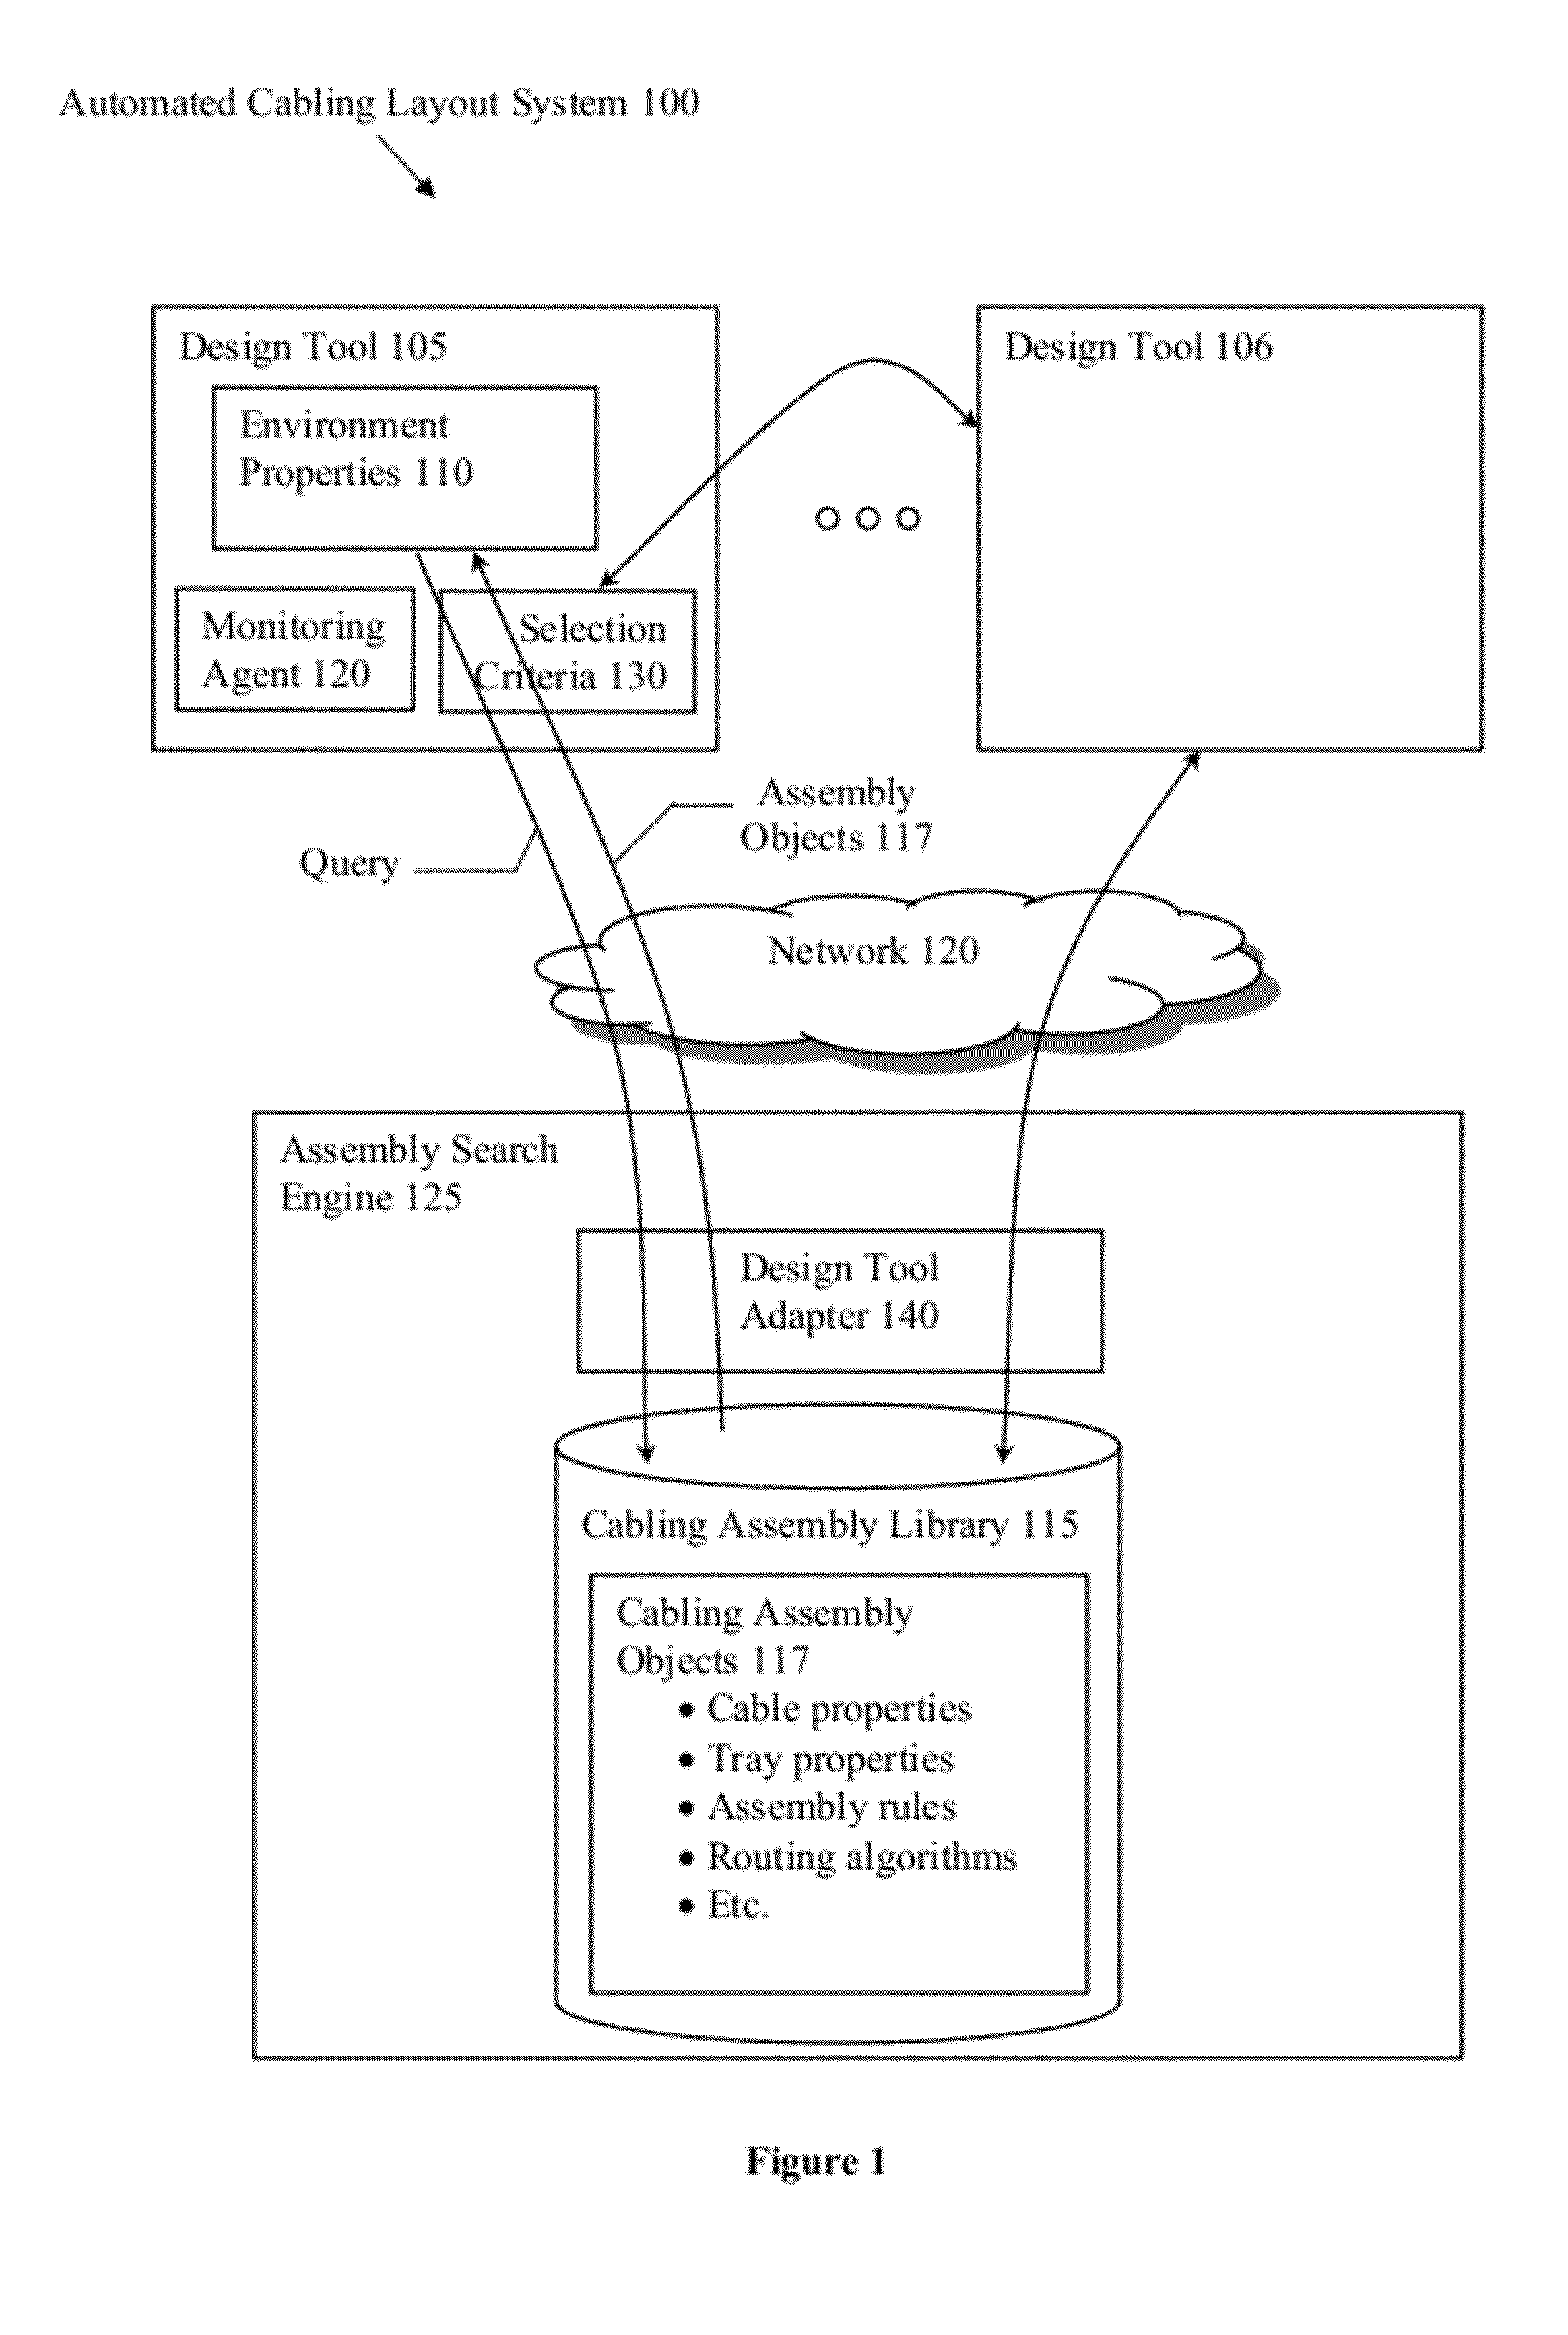 Automated cabling layout systems and methods